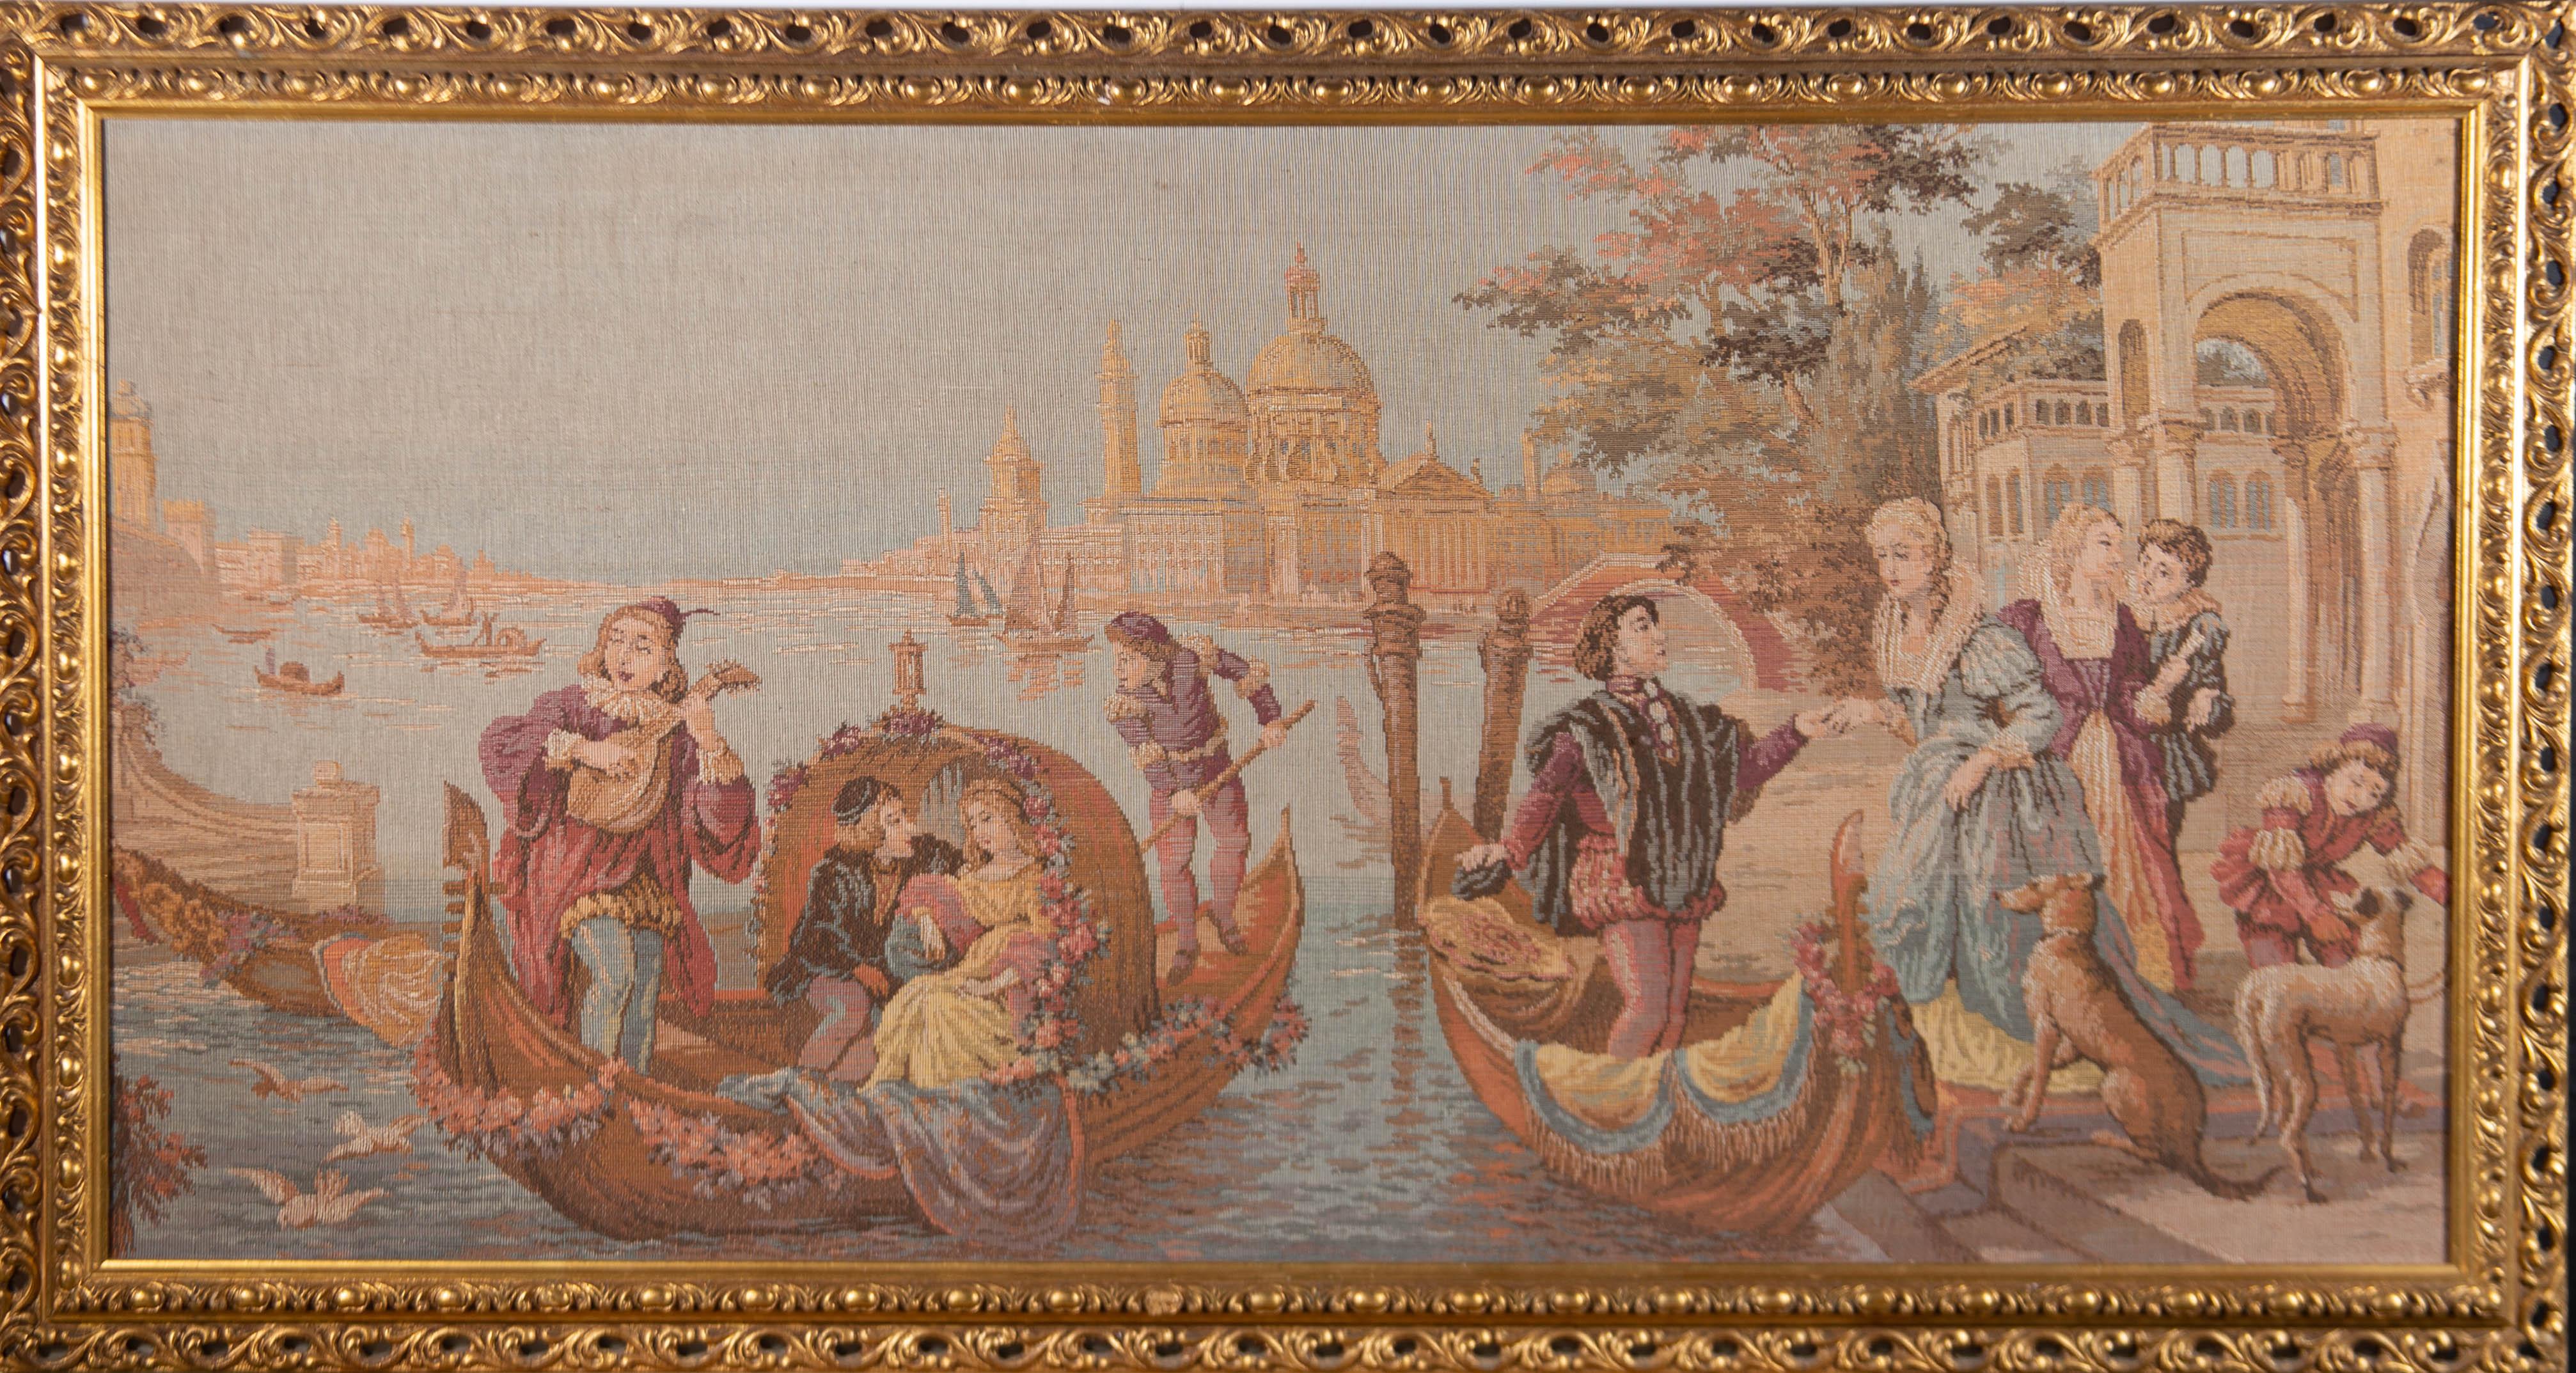 Mid 20th Century Embroidery - Venice Scene - Art by Unknown